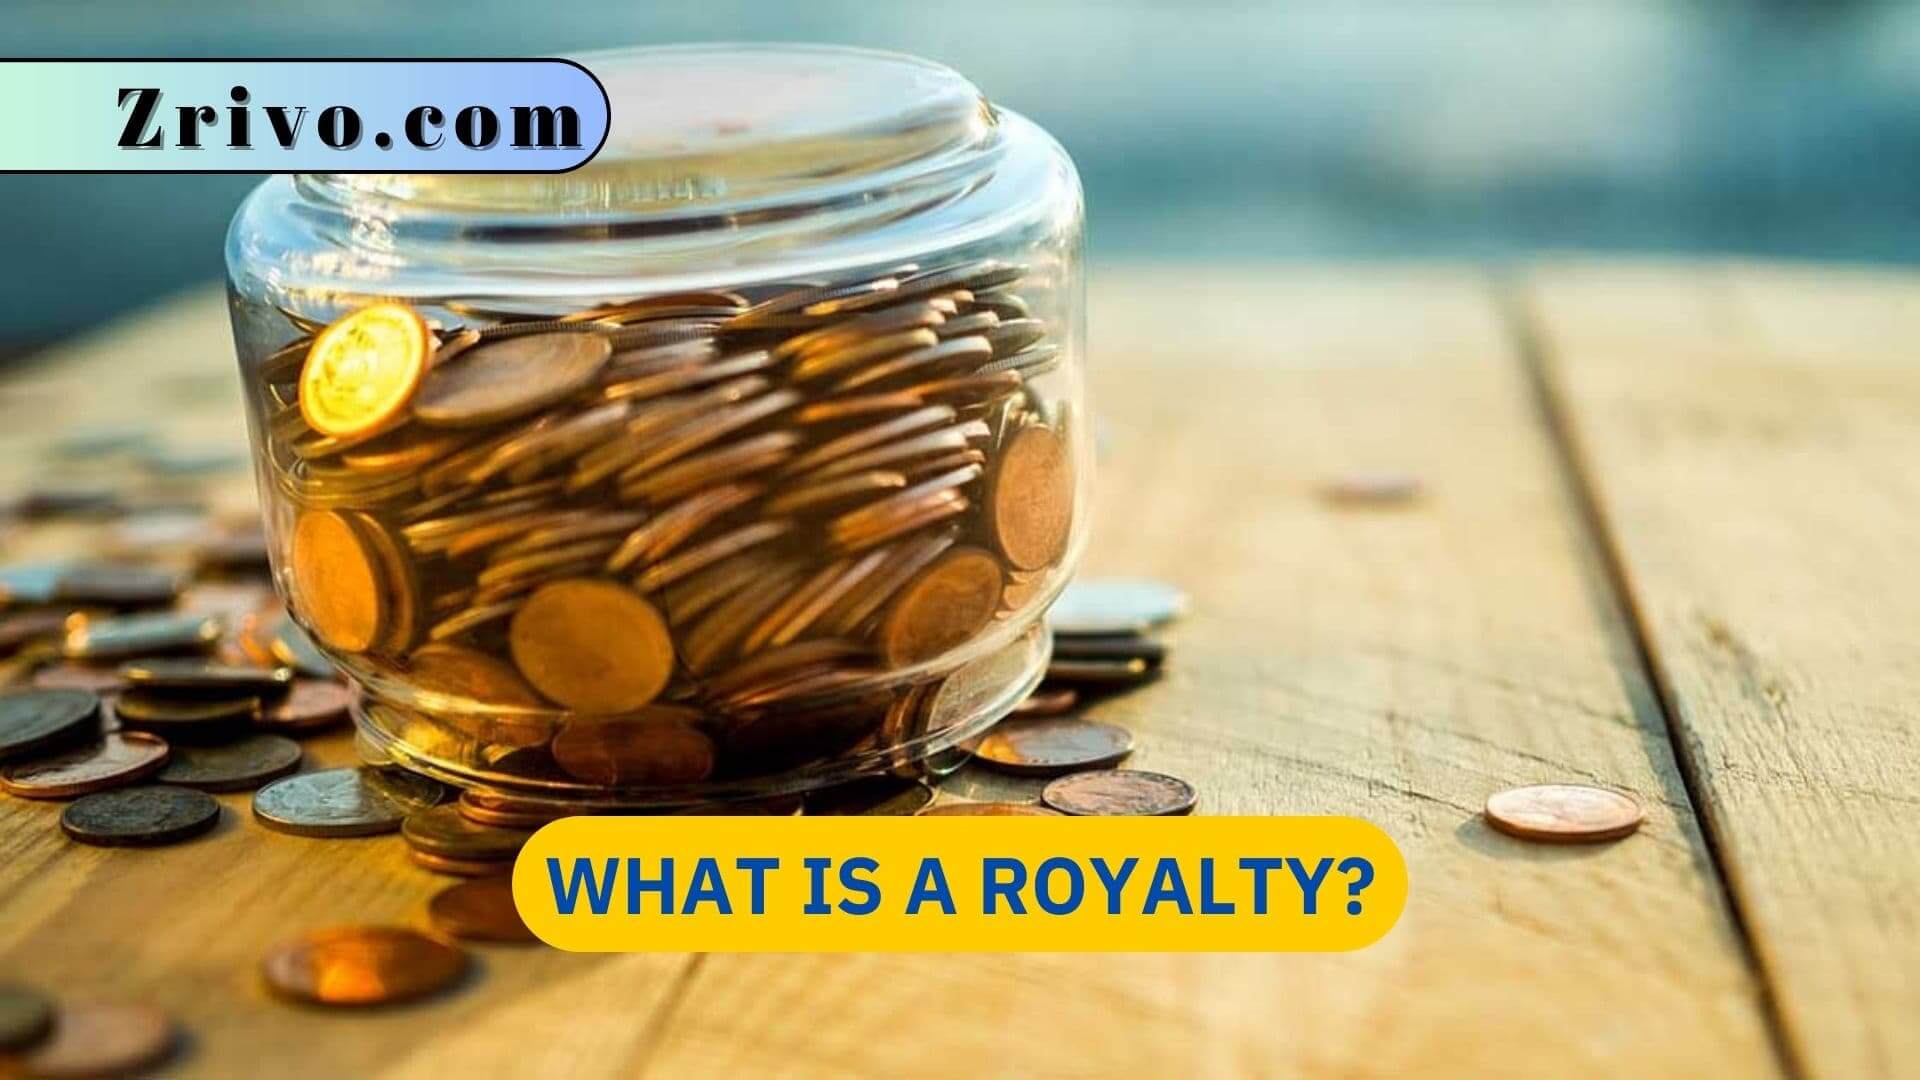 What is a Royalty